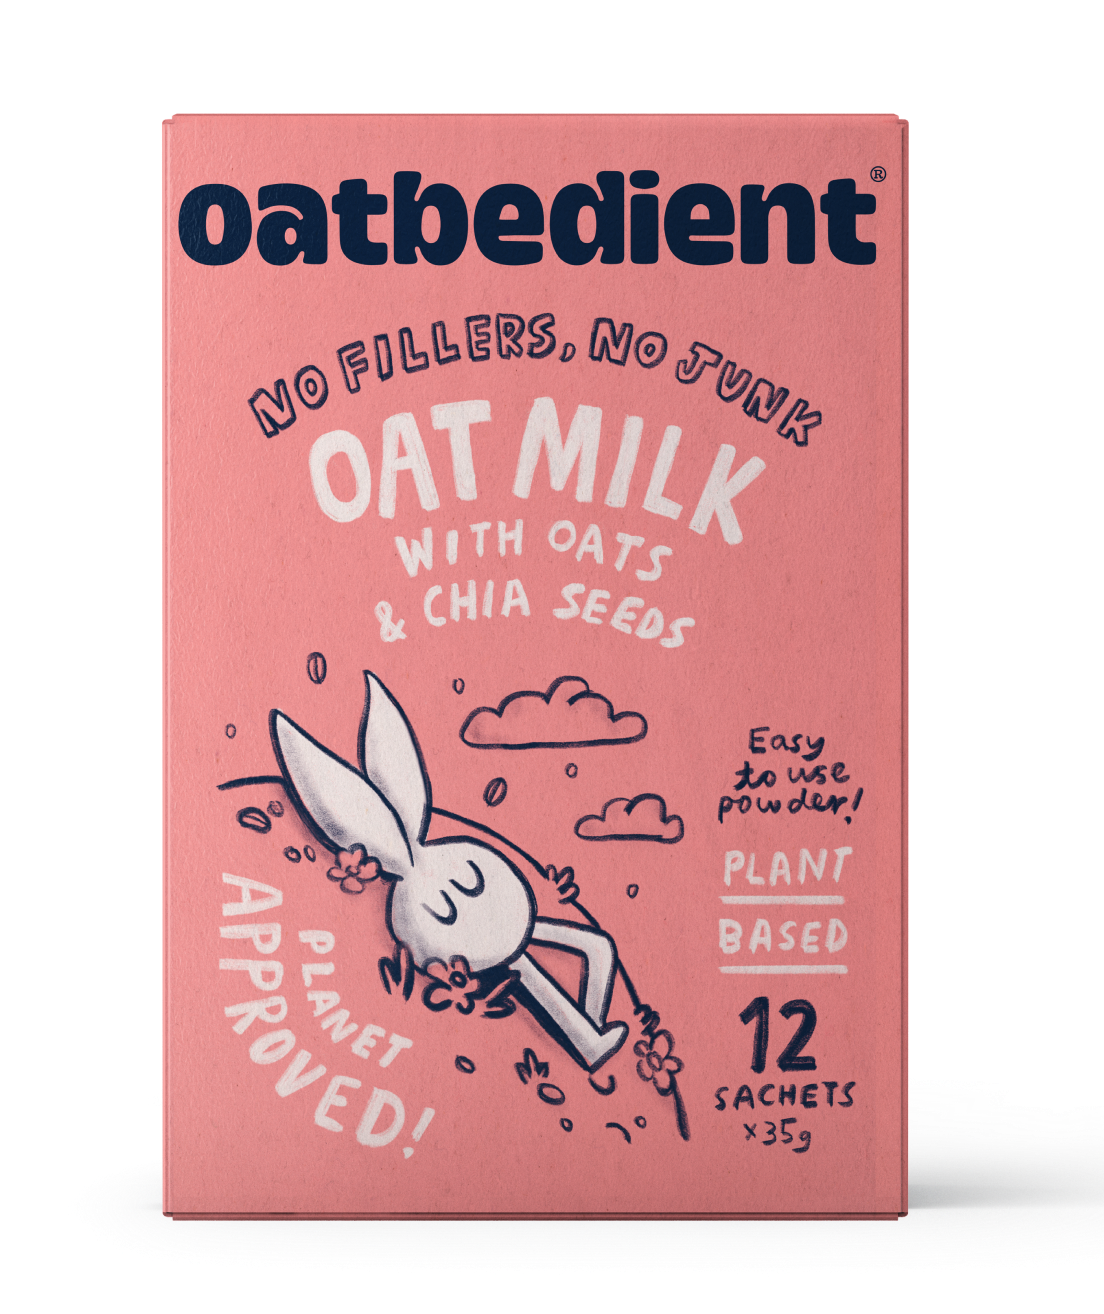 Oat Milk with Oats & Chia Seeds box of 12